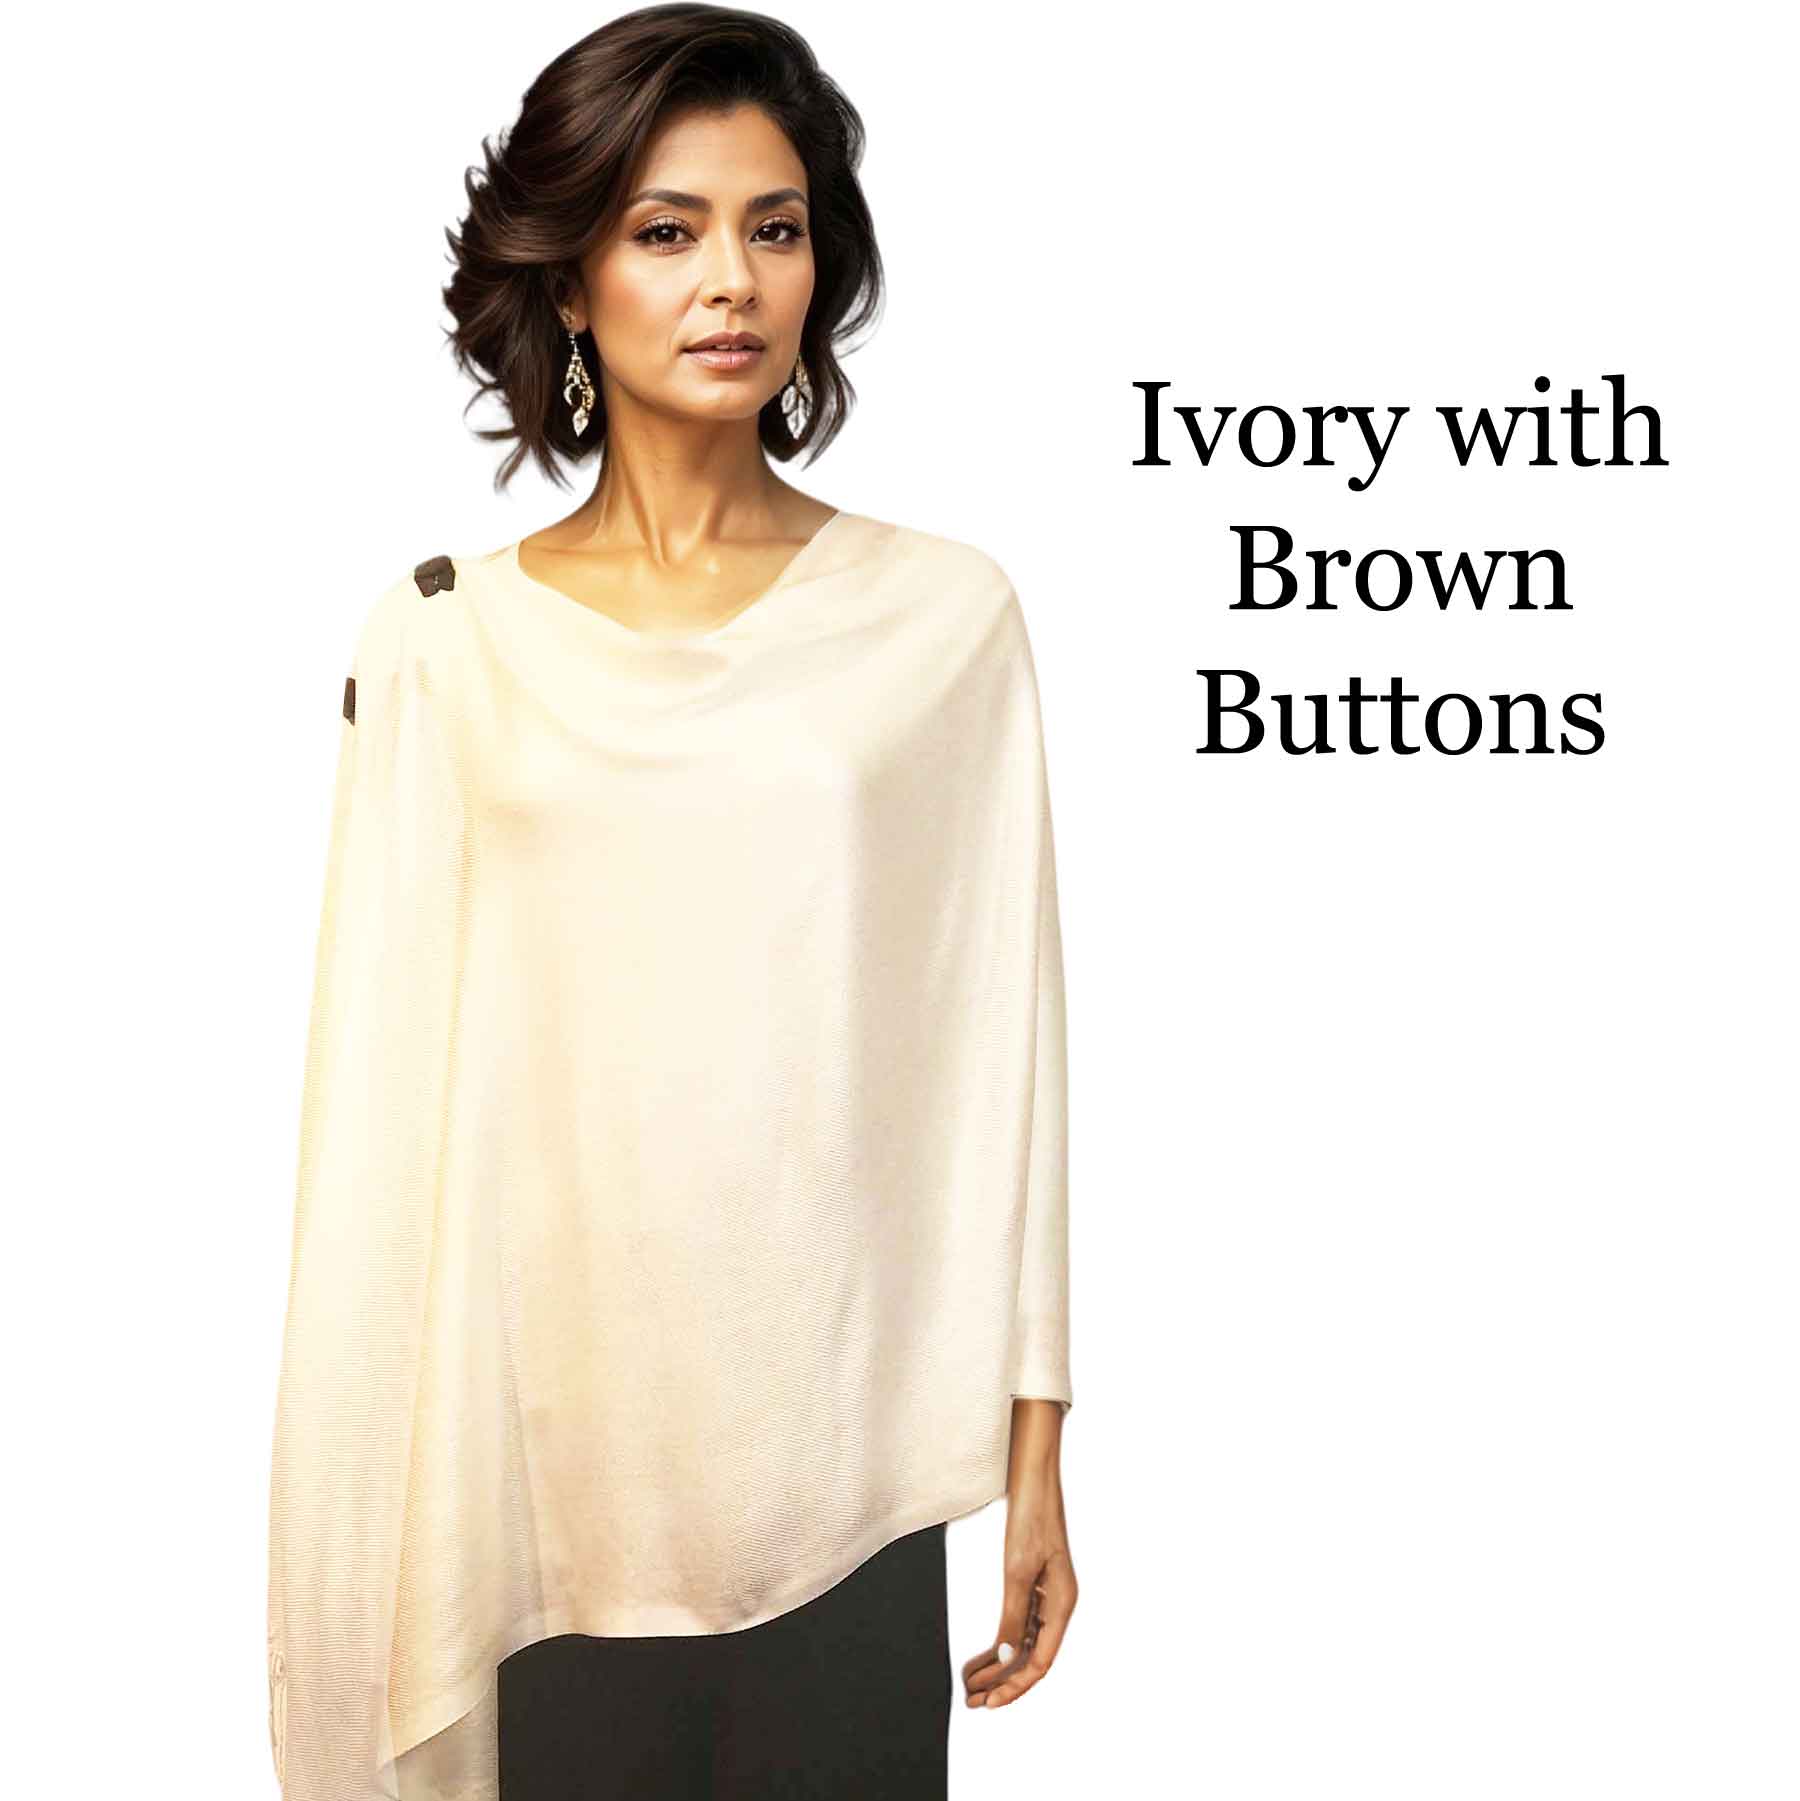 3109 - Solid Ivory<br>
Pashmina Style Button Shawl